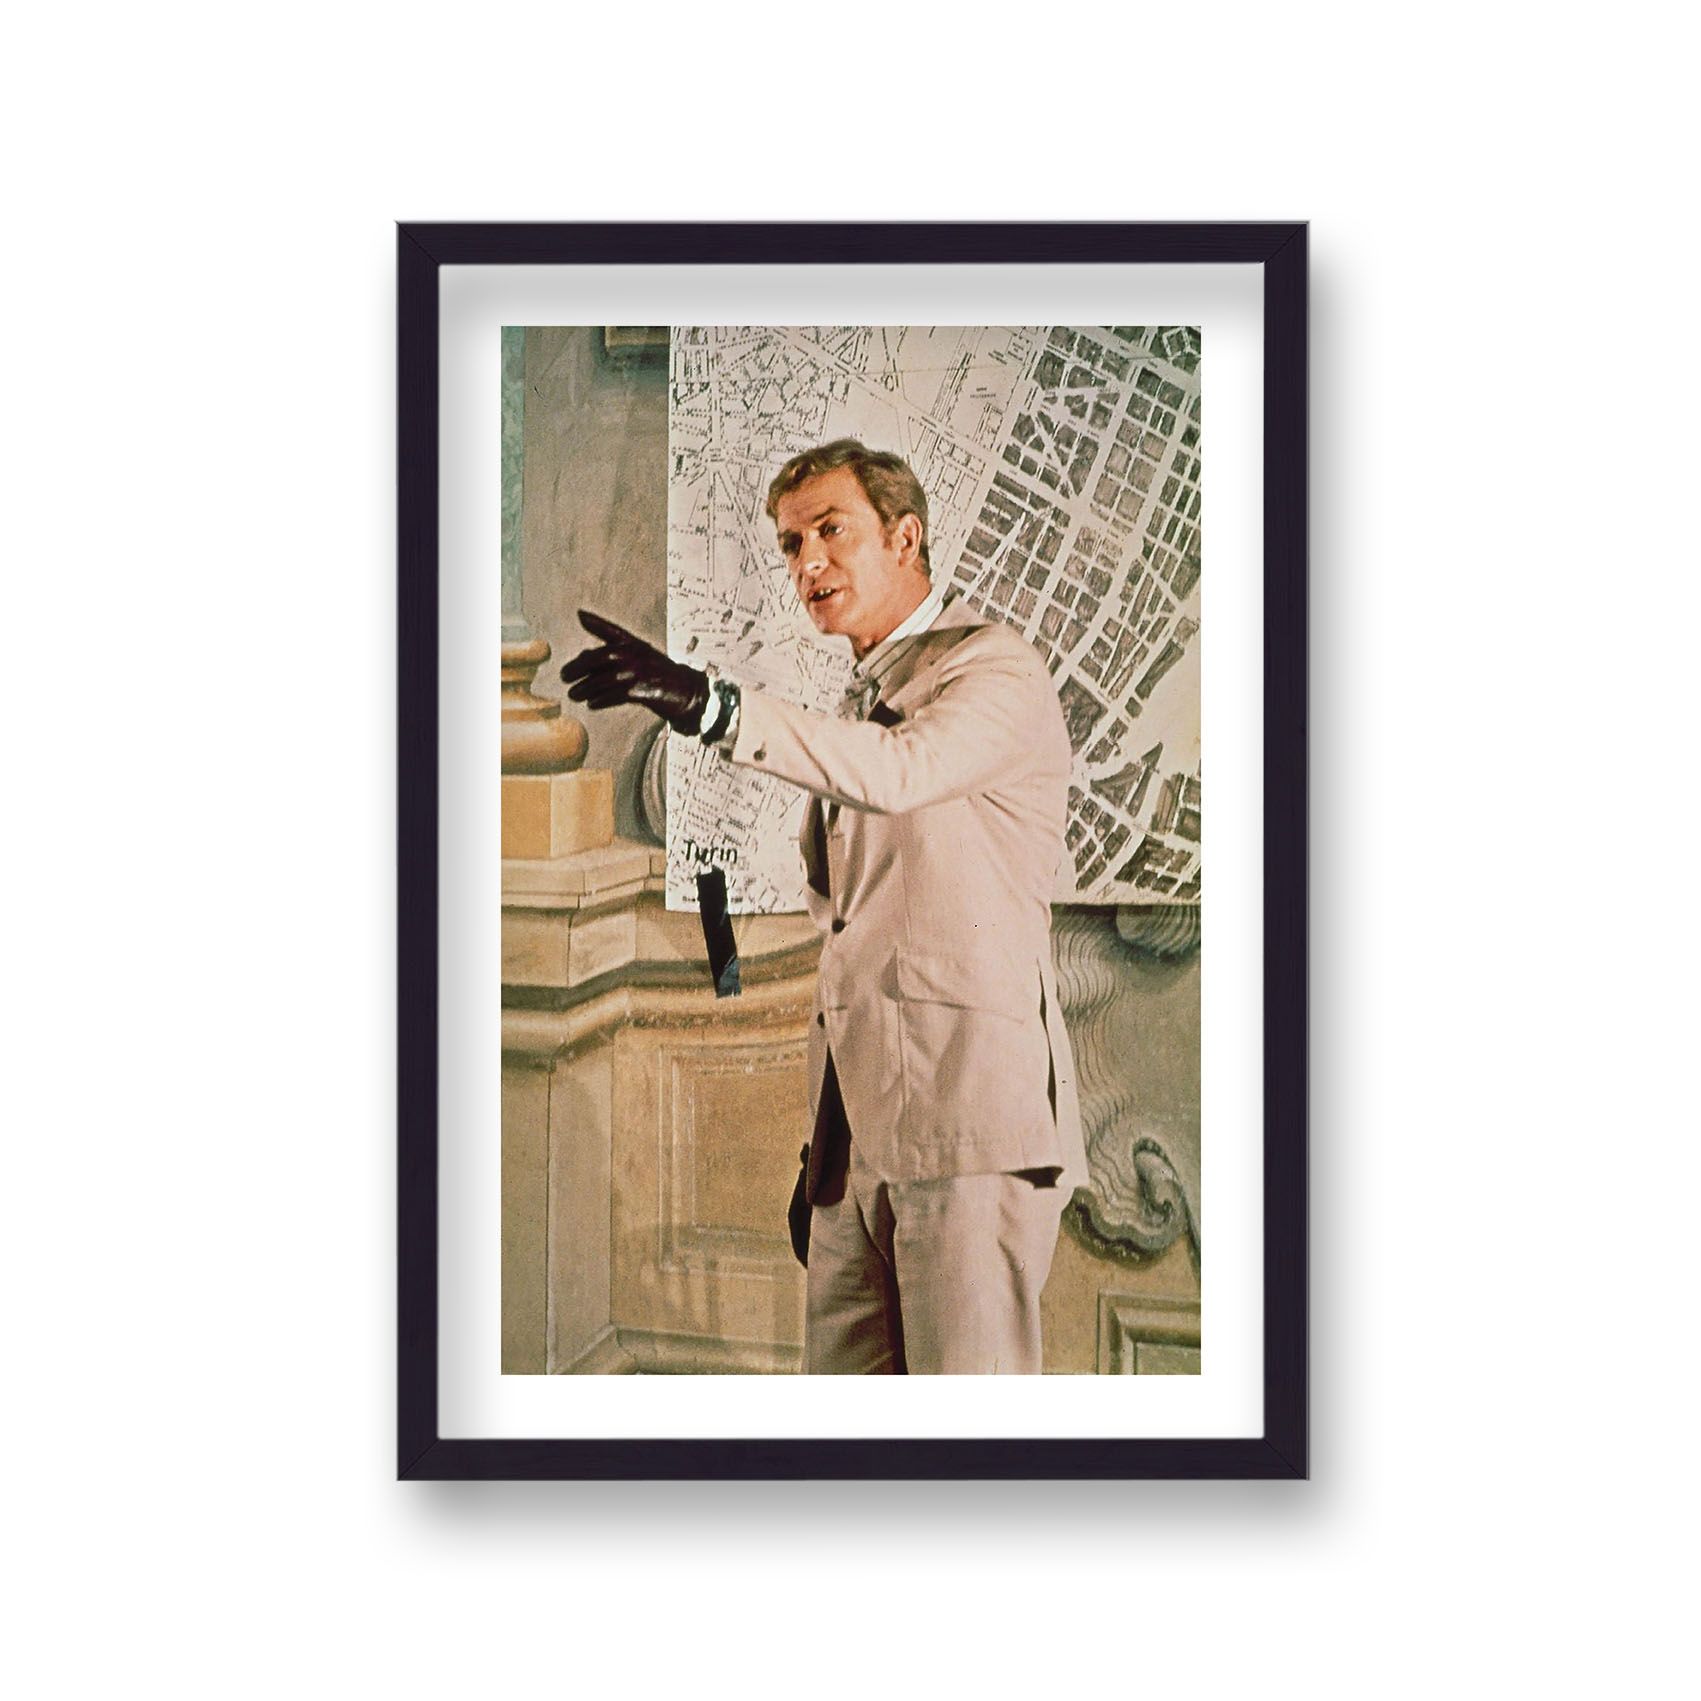 Michael Caine as Charlie Croker in Scene from The Italian Job 1969 Vintage Icon Print